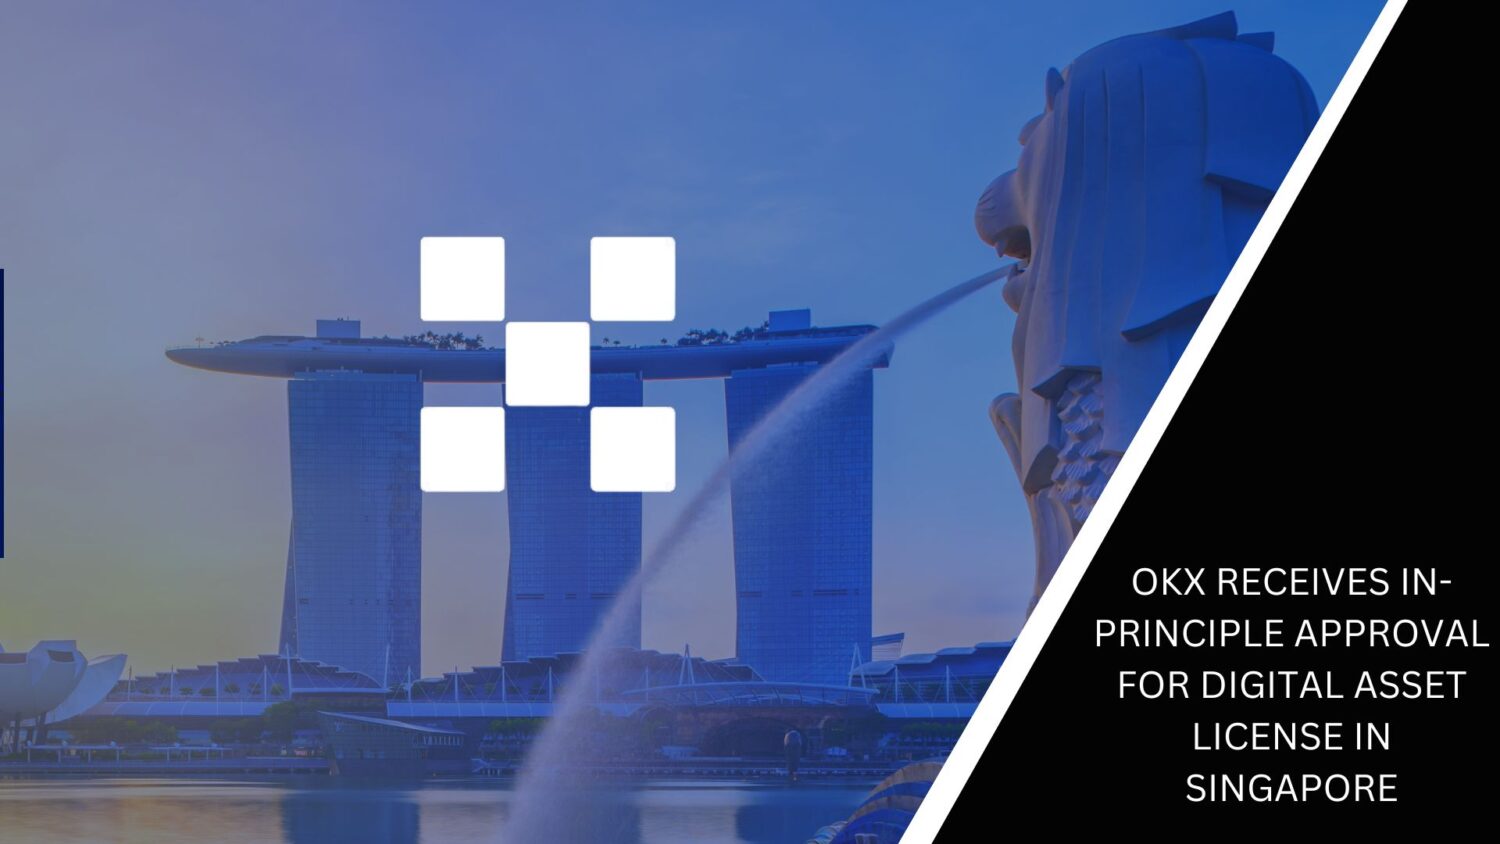 Okx Receives In-Principle Approval For Digital Asset License In Singapore